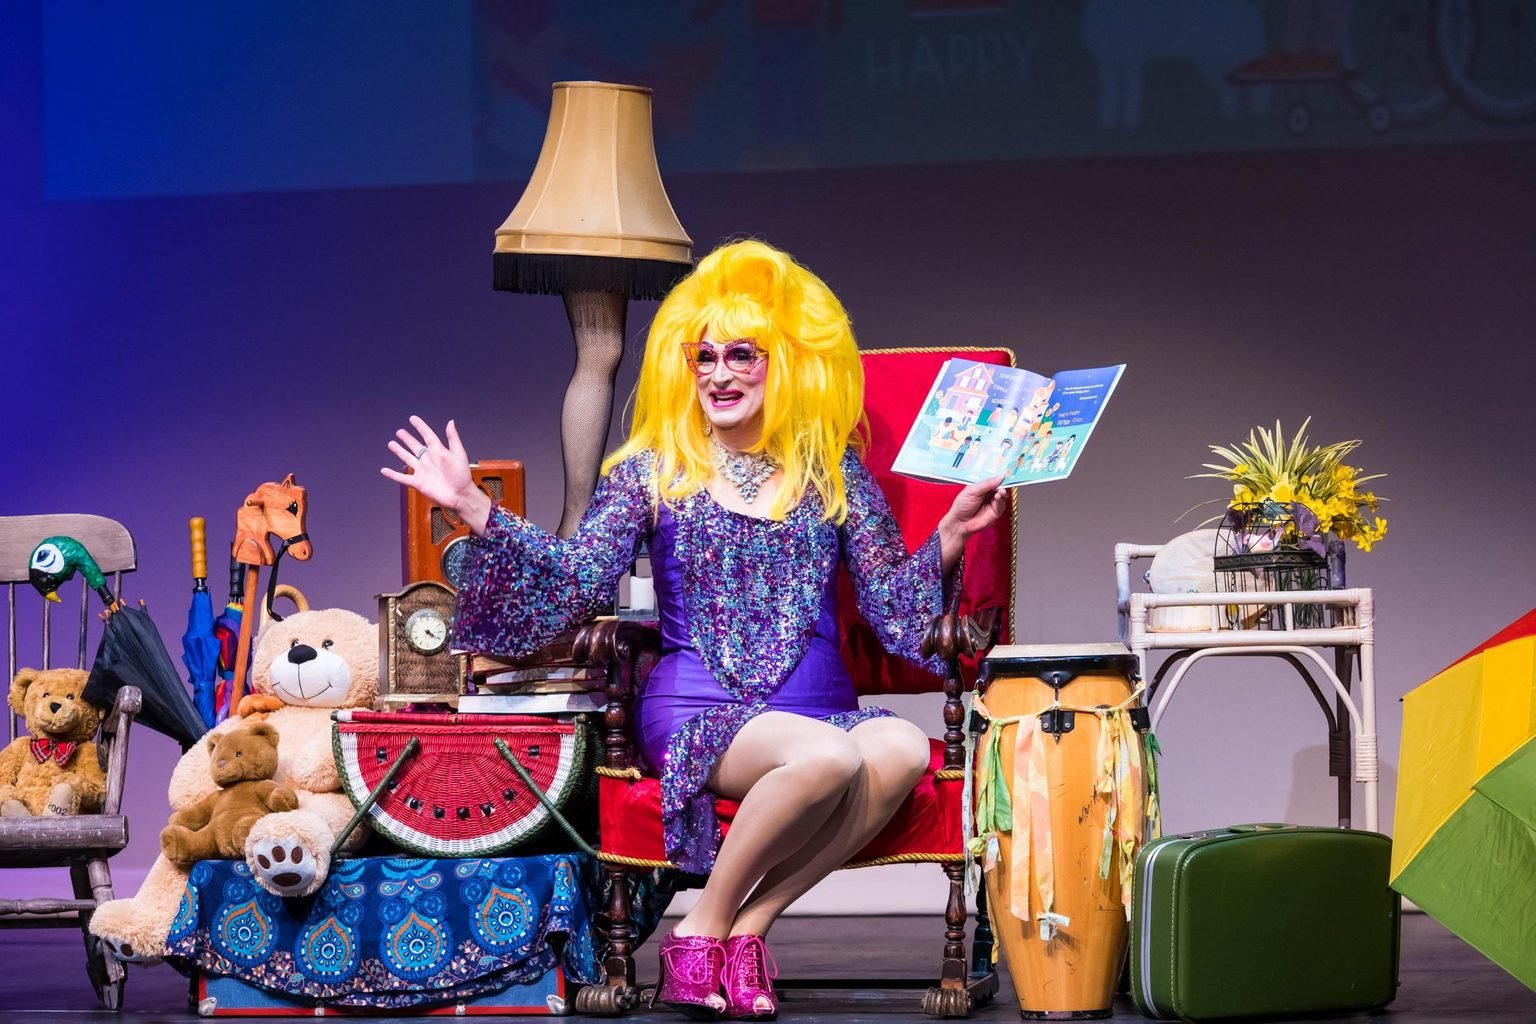 What Happens at Drag Queen Story Hour, According to a Drag Queen